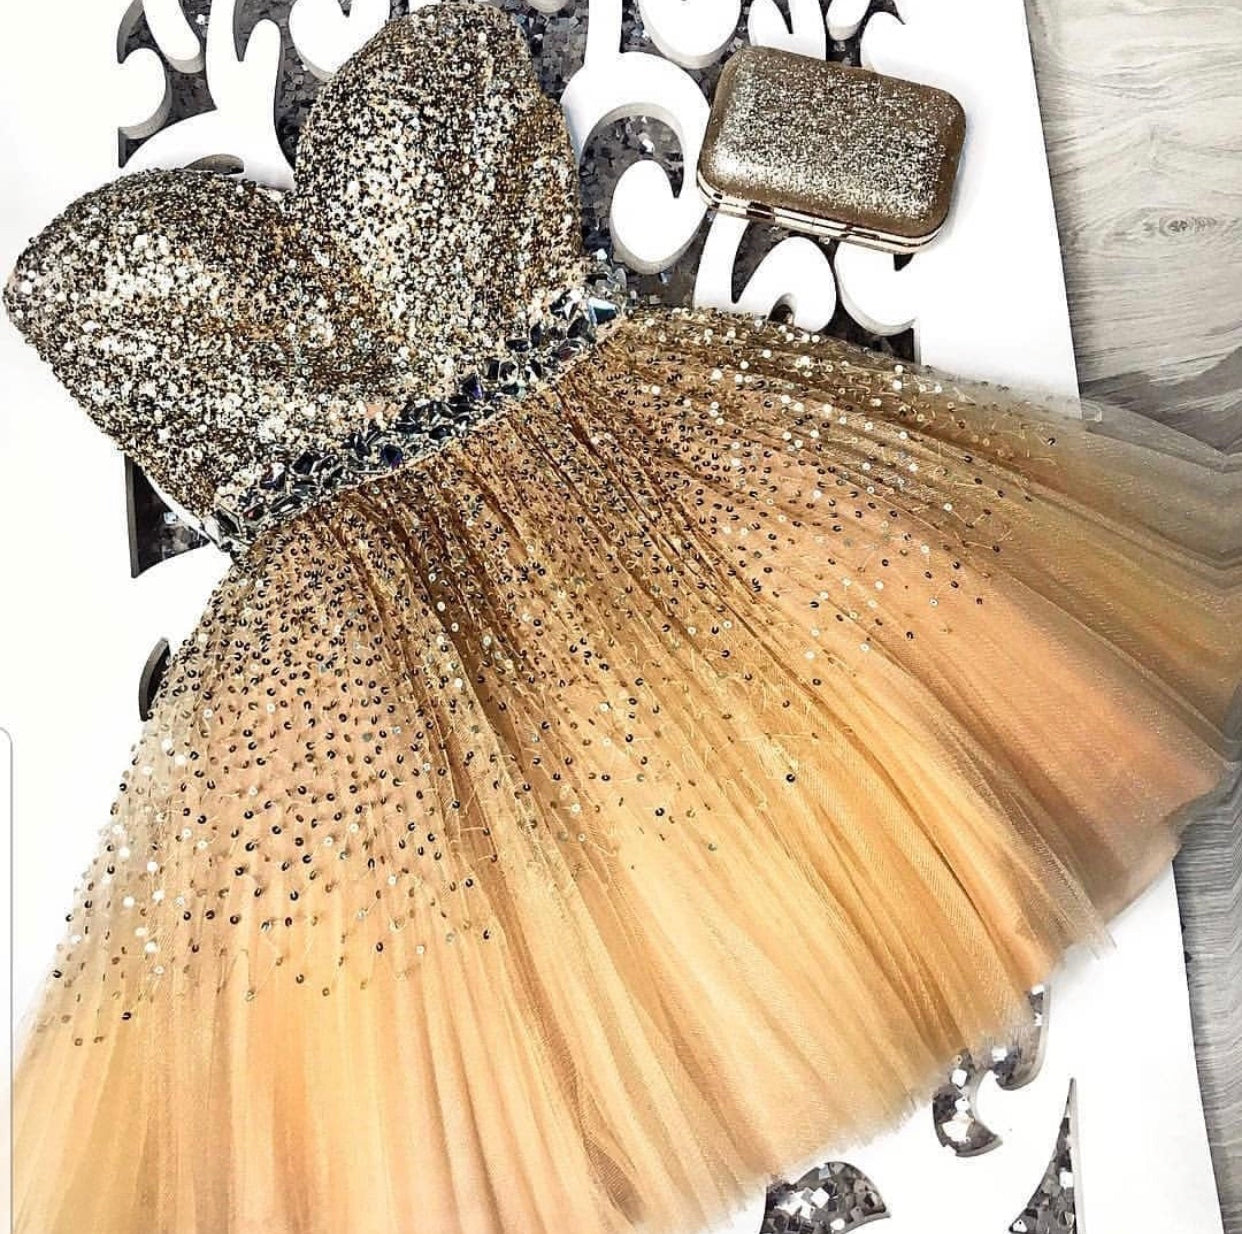 Short Tulle Sequins Sweetheart Prom Homecoming Dress Beaded Sashes